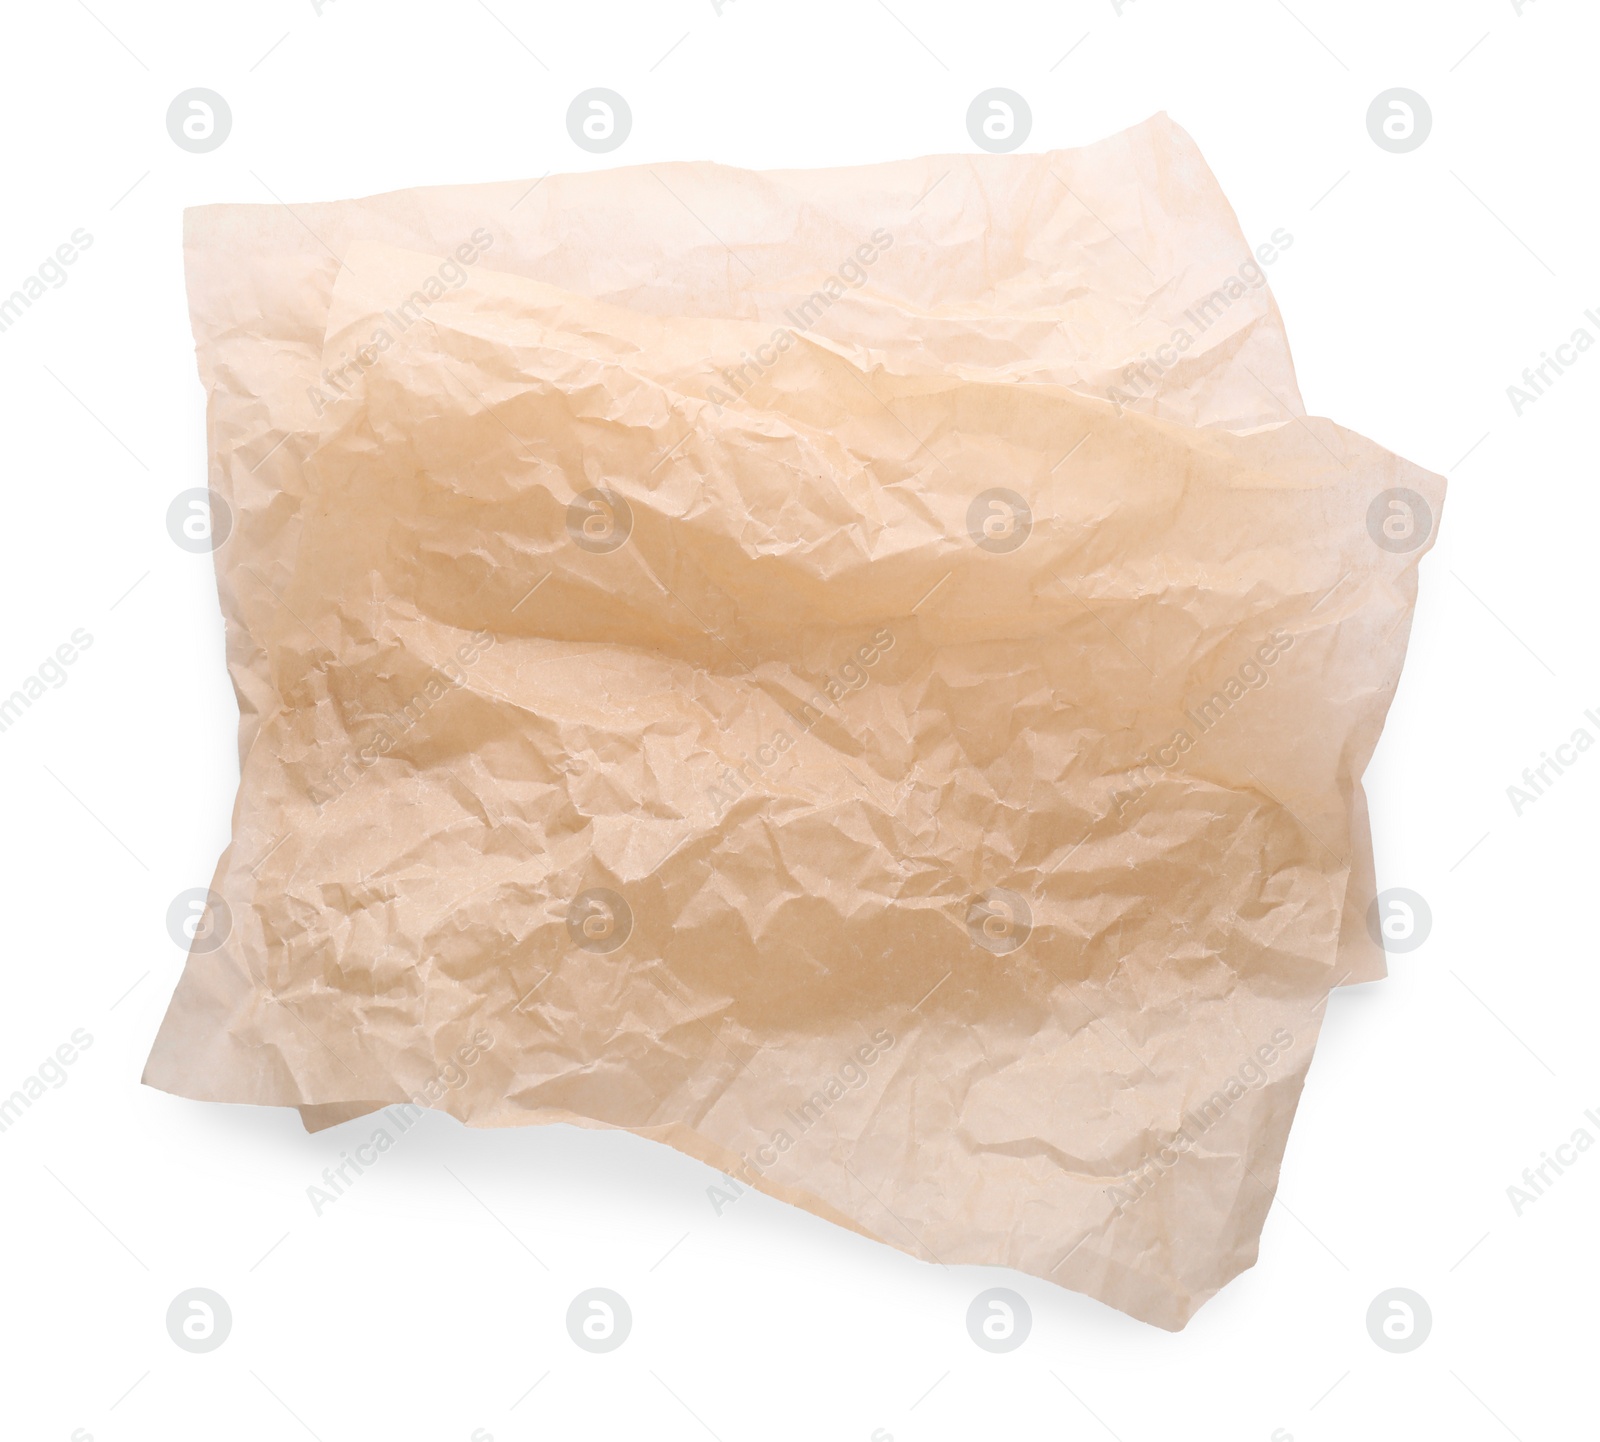 Photo of Sheets of crumpled baking paper isolated on white